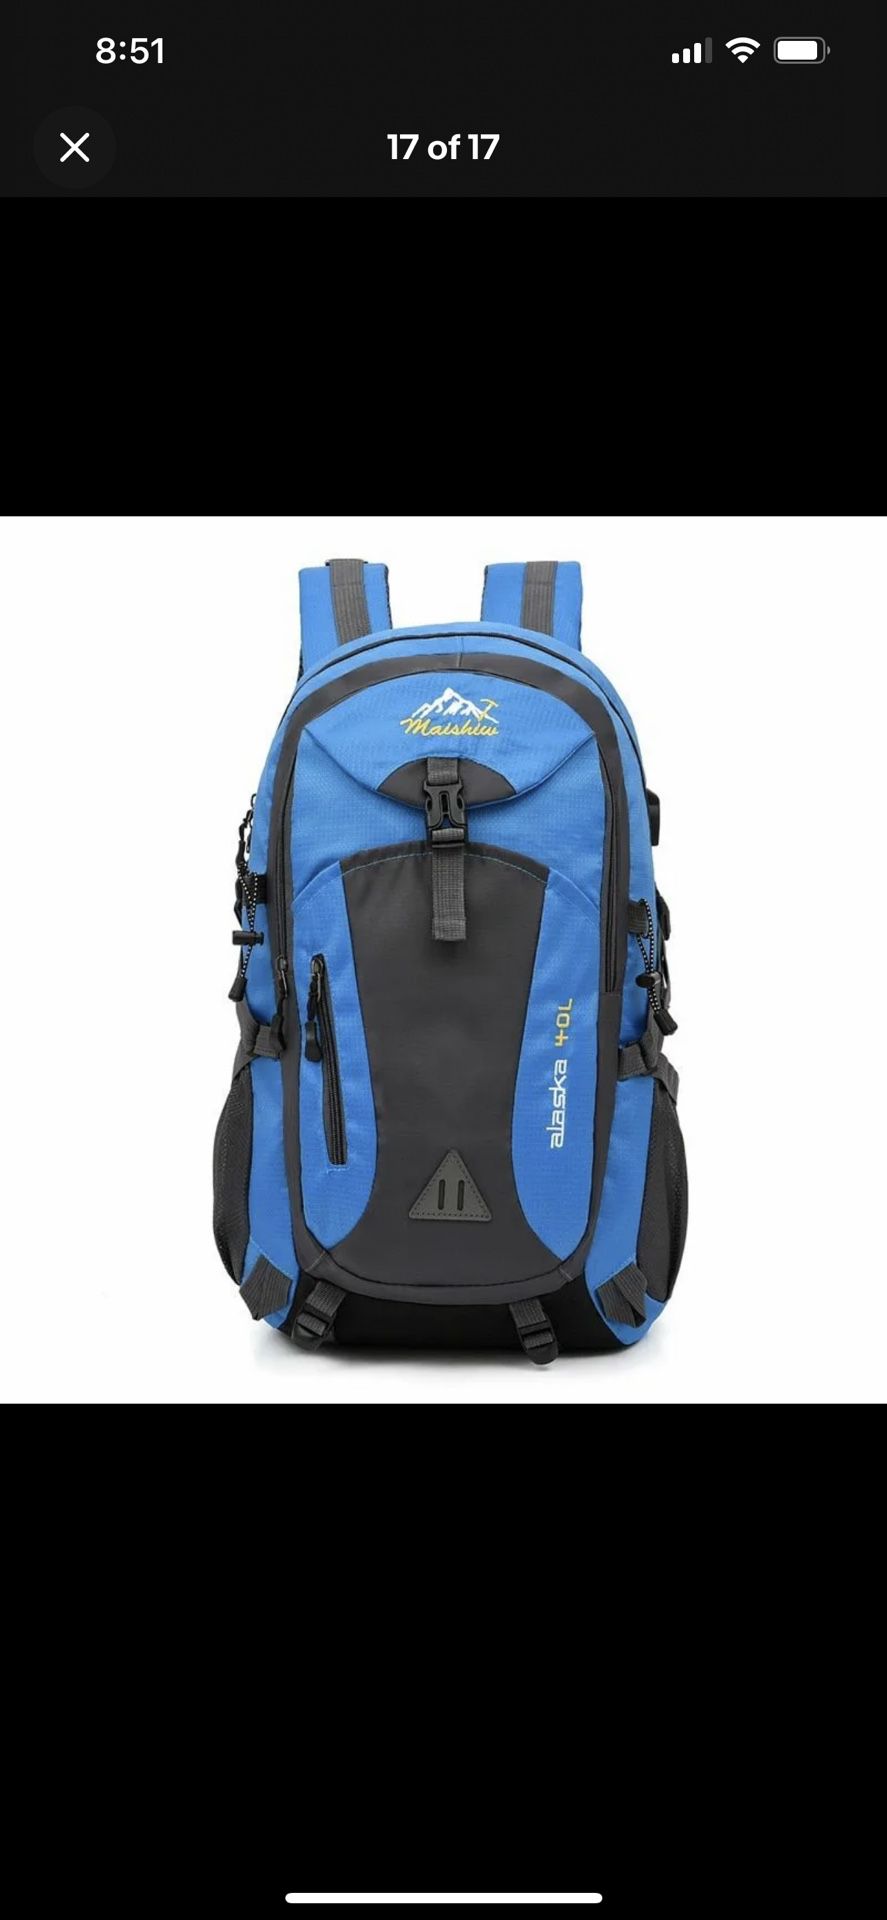  Backpack Travel Pack Sports Bag Pack Mountaineering Hiking Camping Backpack